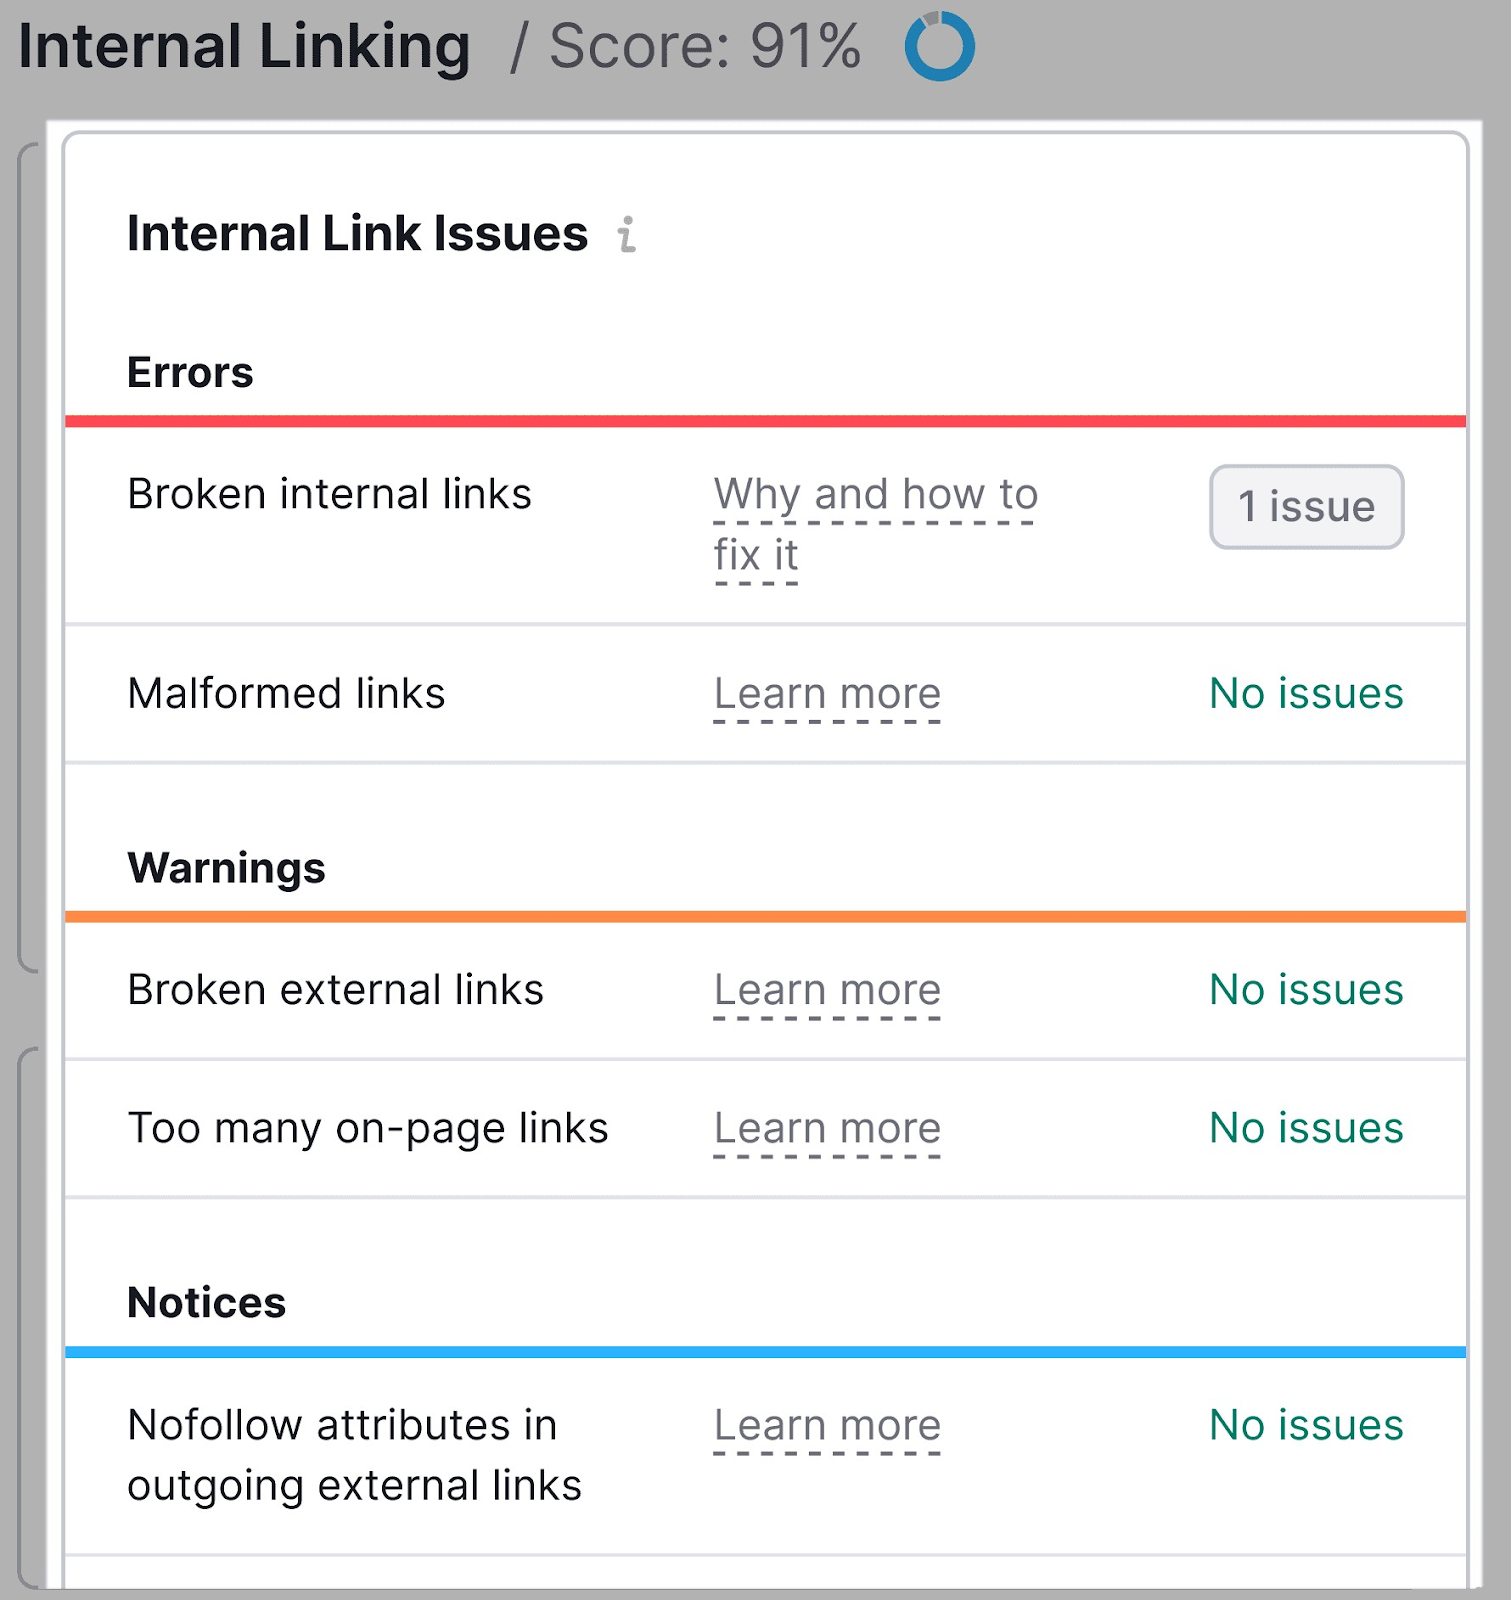 Internal Link Issues section